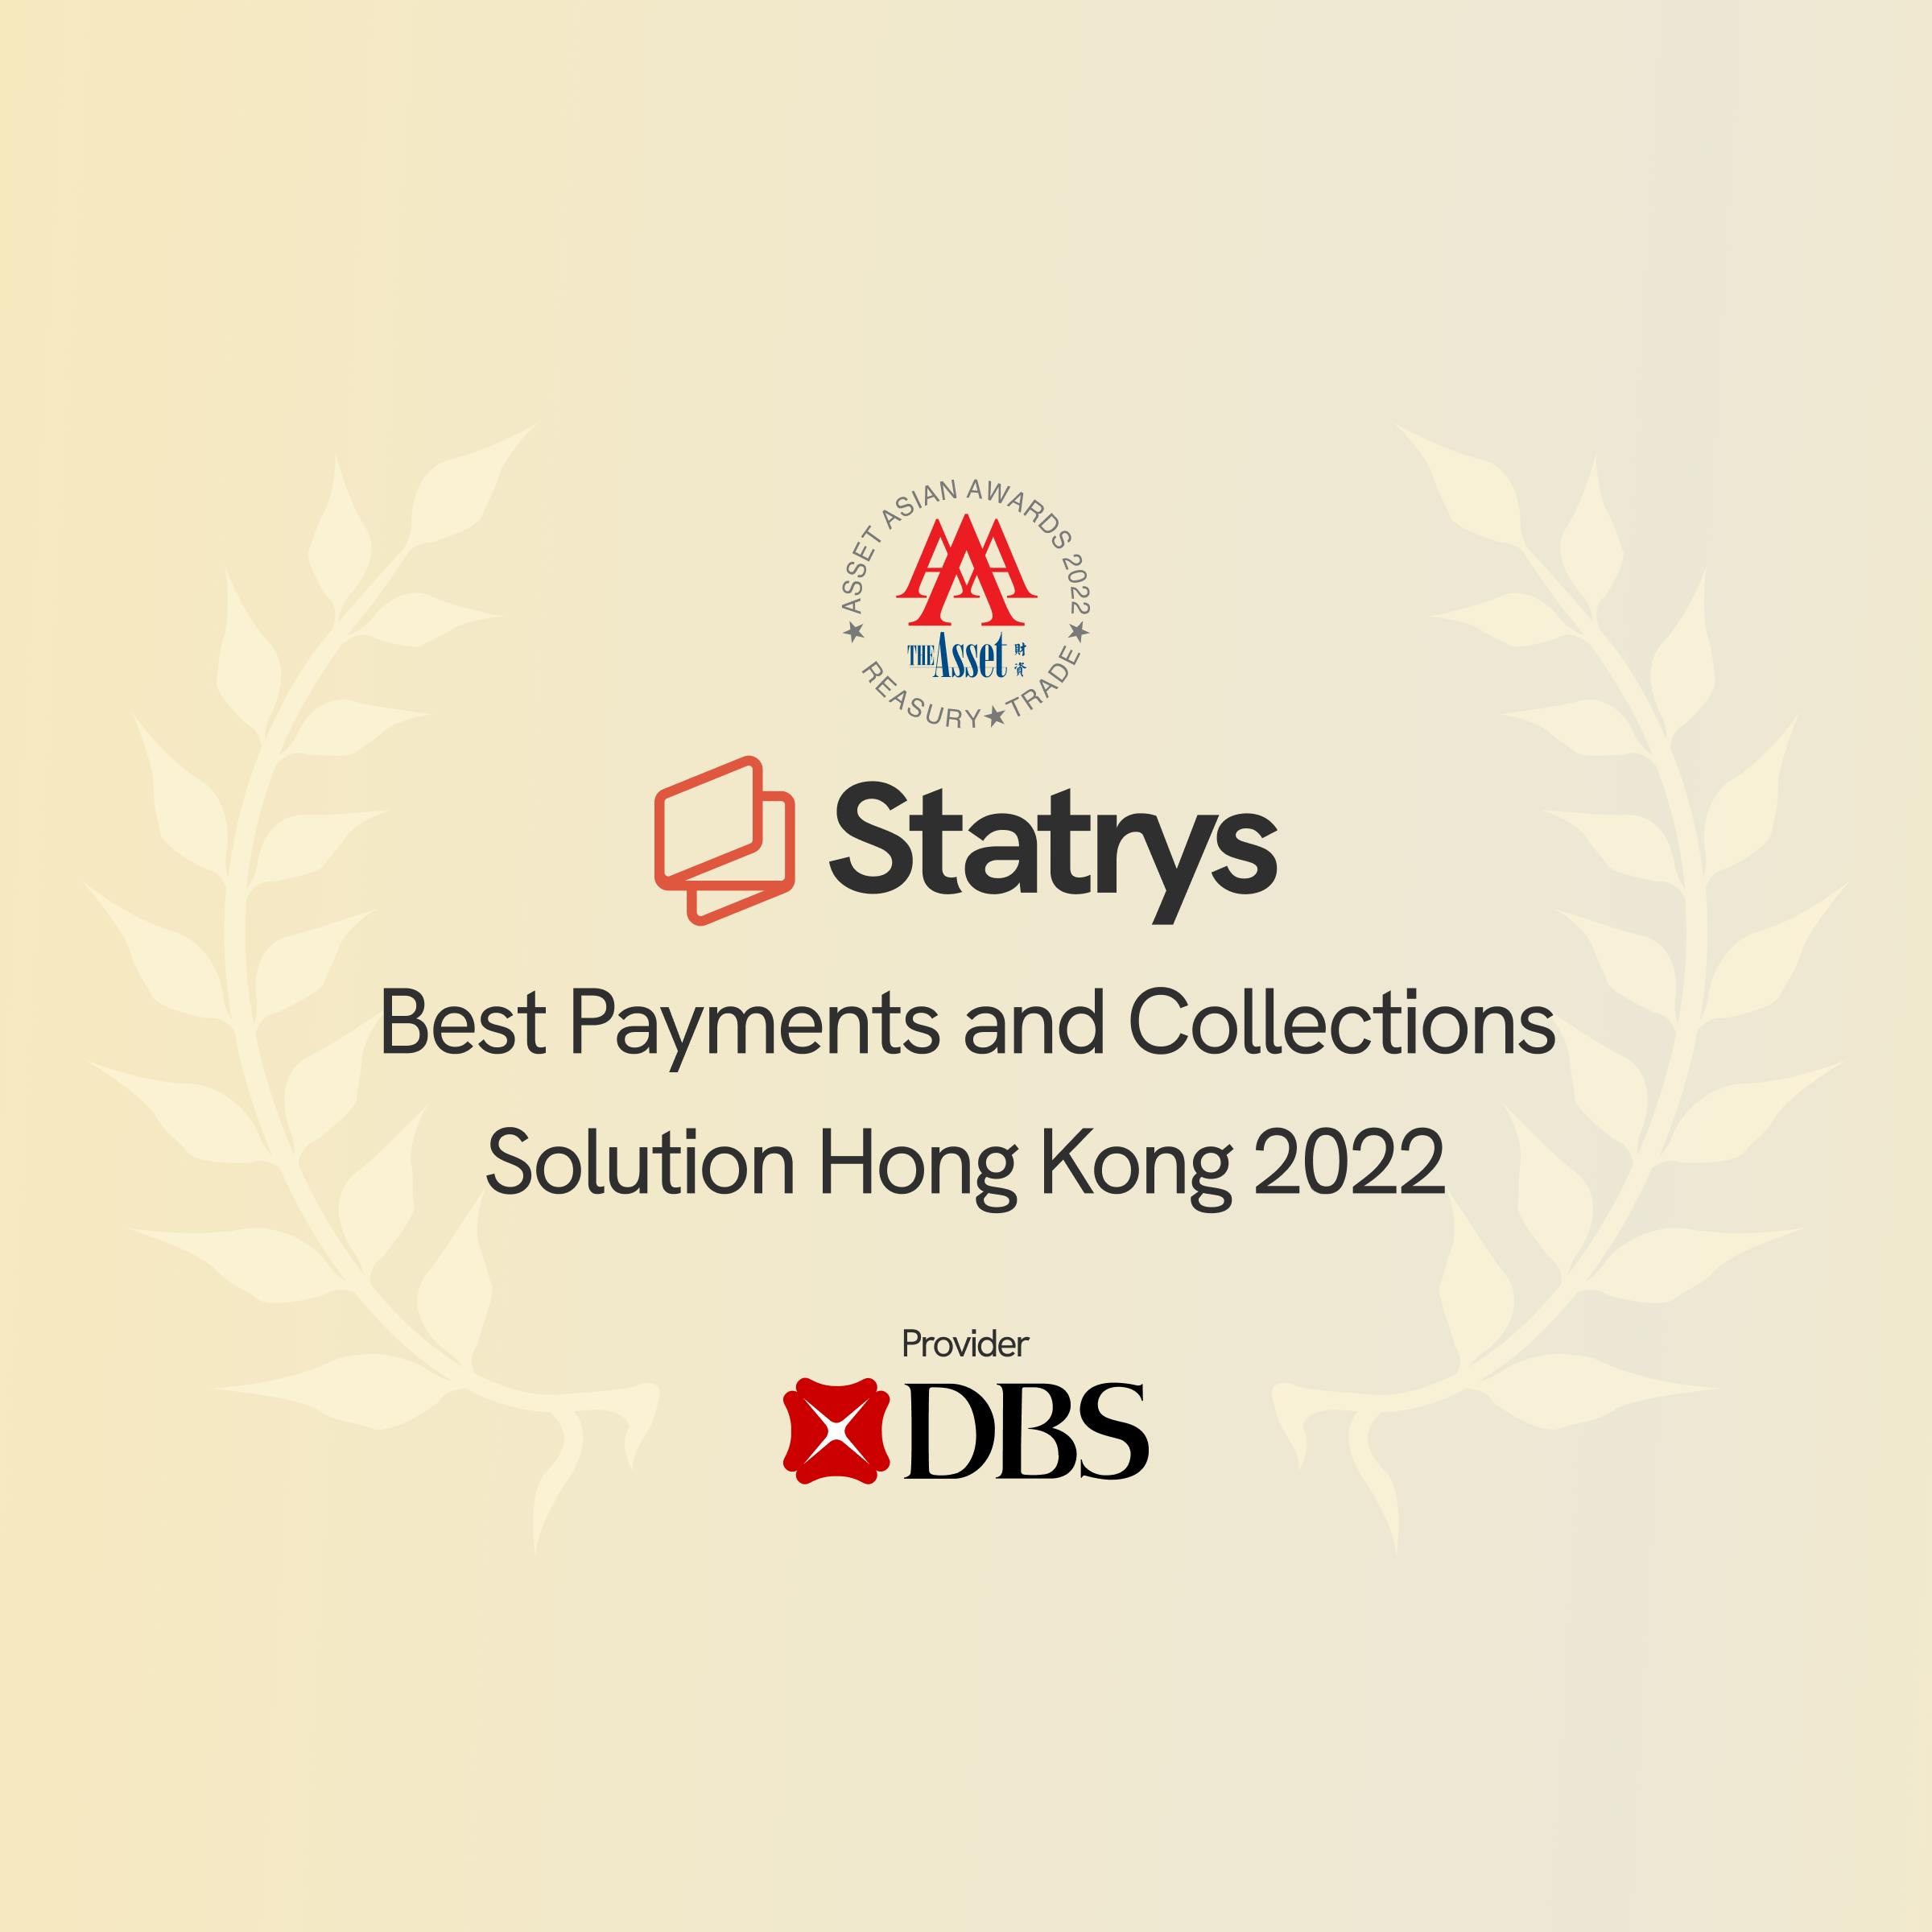 Statrys 'Best Payments and Collections Solution Hong Kong' 2022